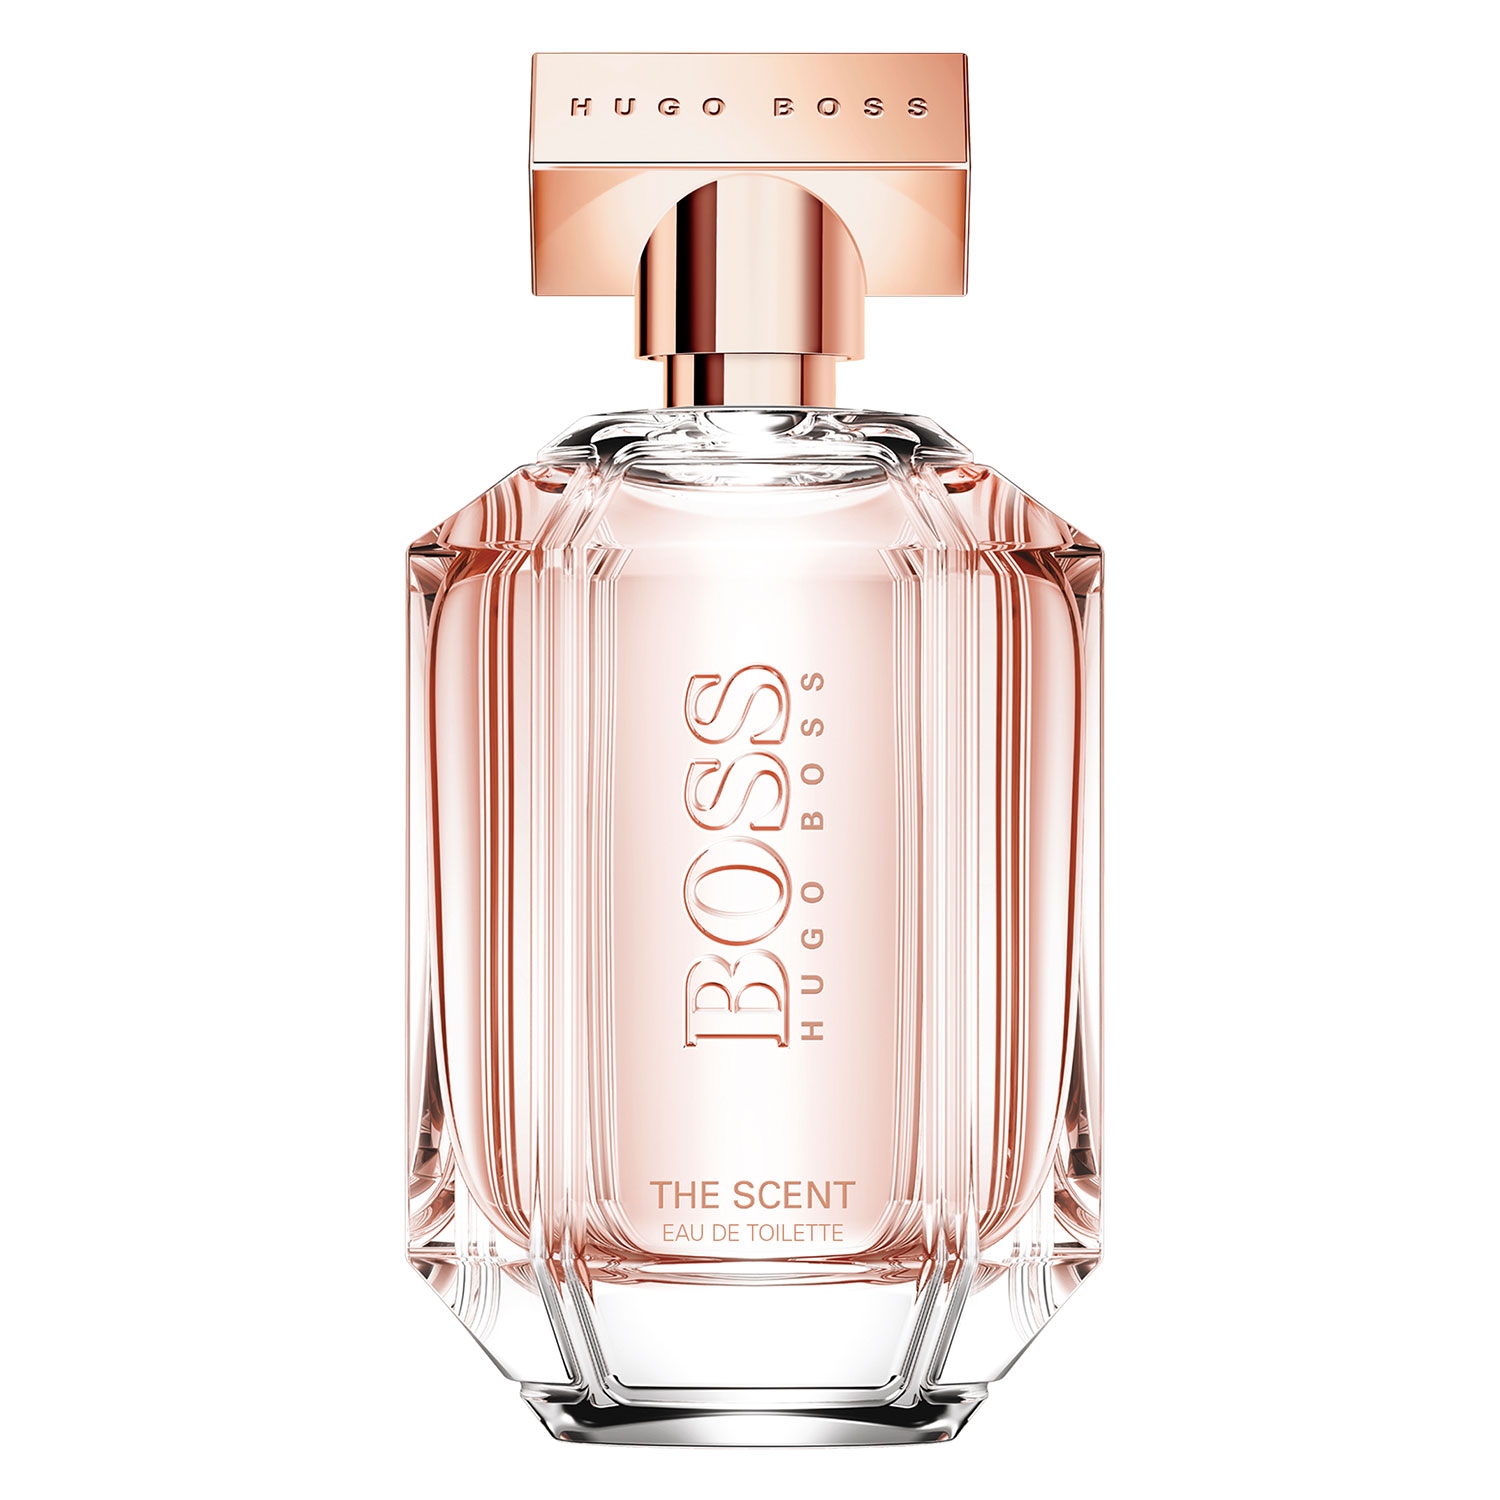 Product image from Boss The Scent - Eau de Toilette for Her